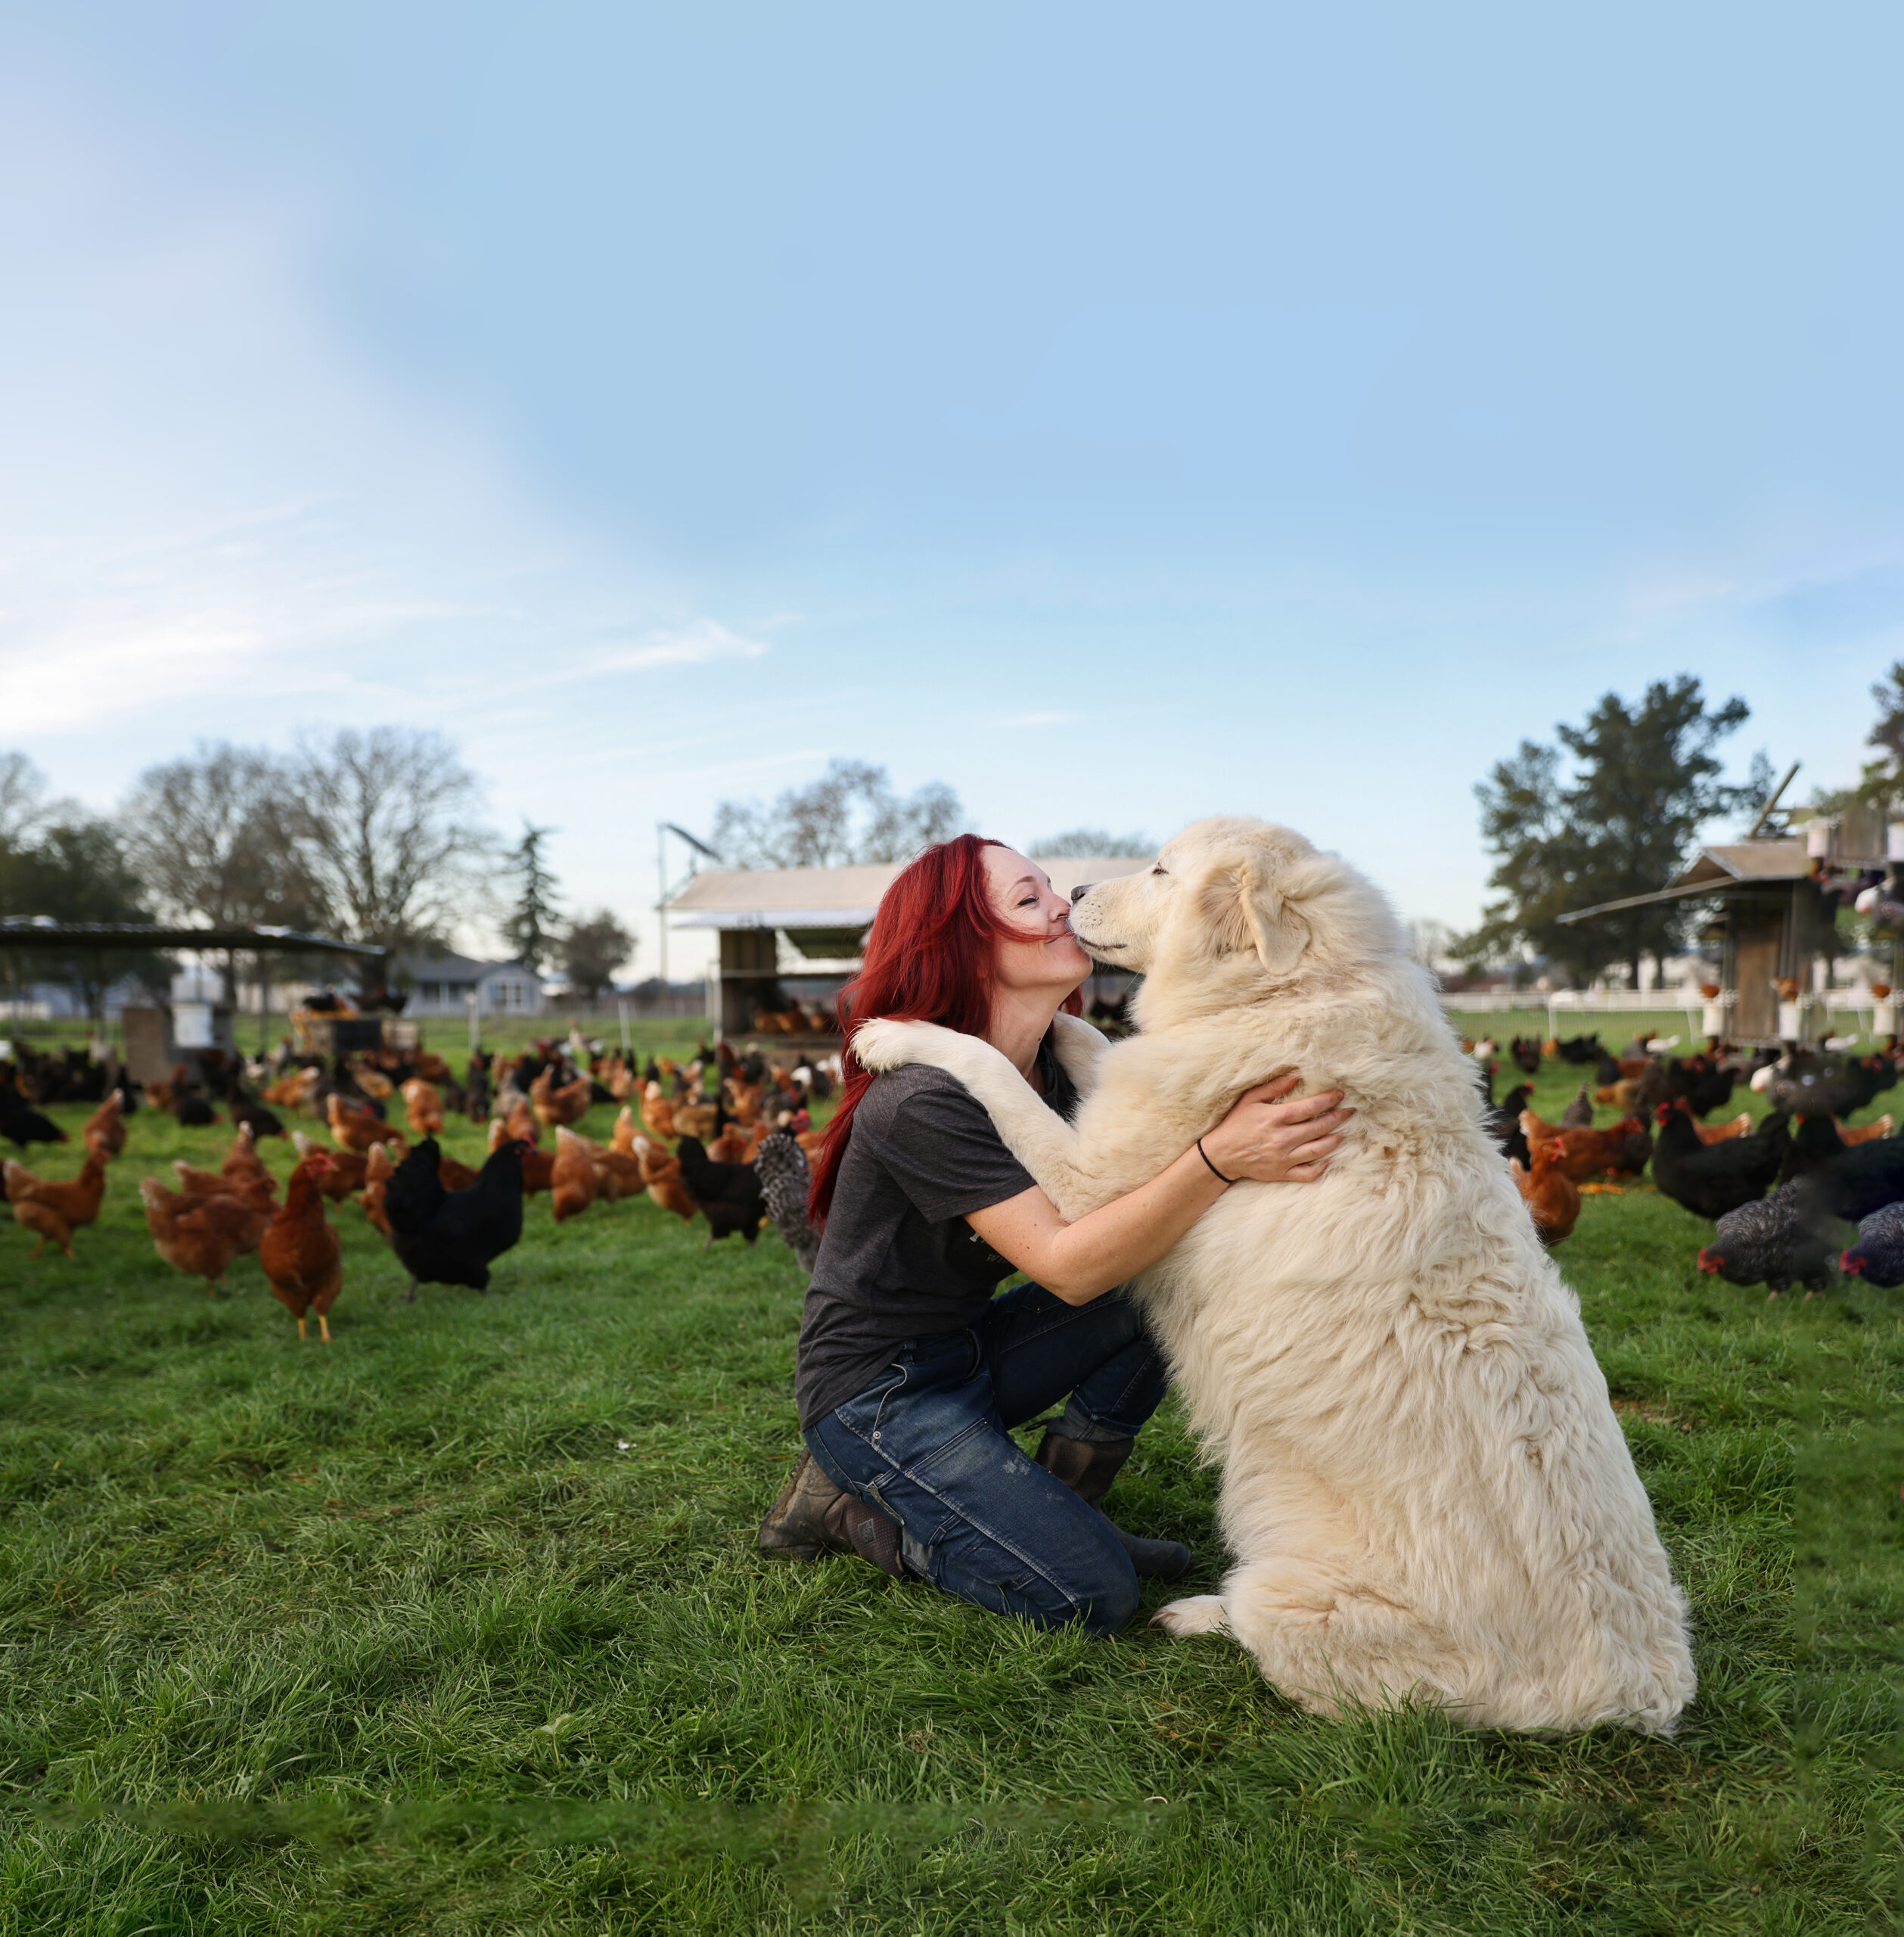 Tiffany Holbrook receives a hug from her livestock guard dog, Phoebe, at Wise Acre Farm in Windsor on Wednesday, January 12, 2022. (Christopher Chung/The Press Democrat)